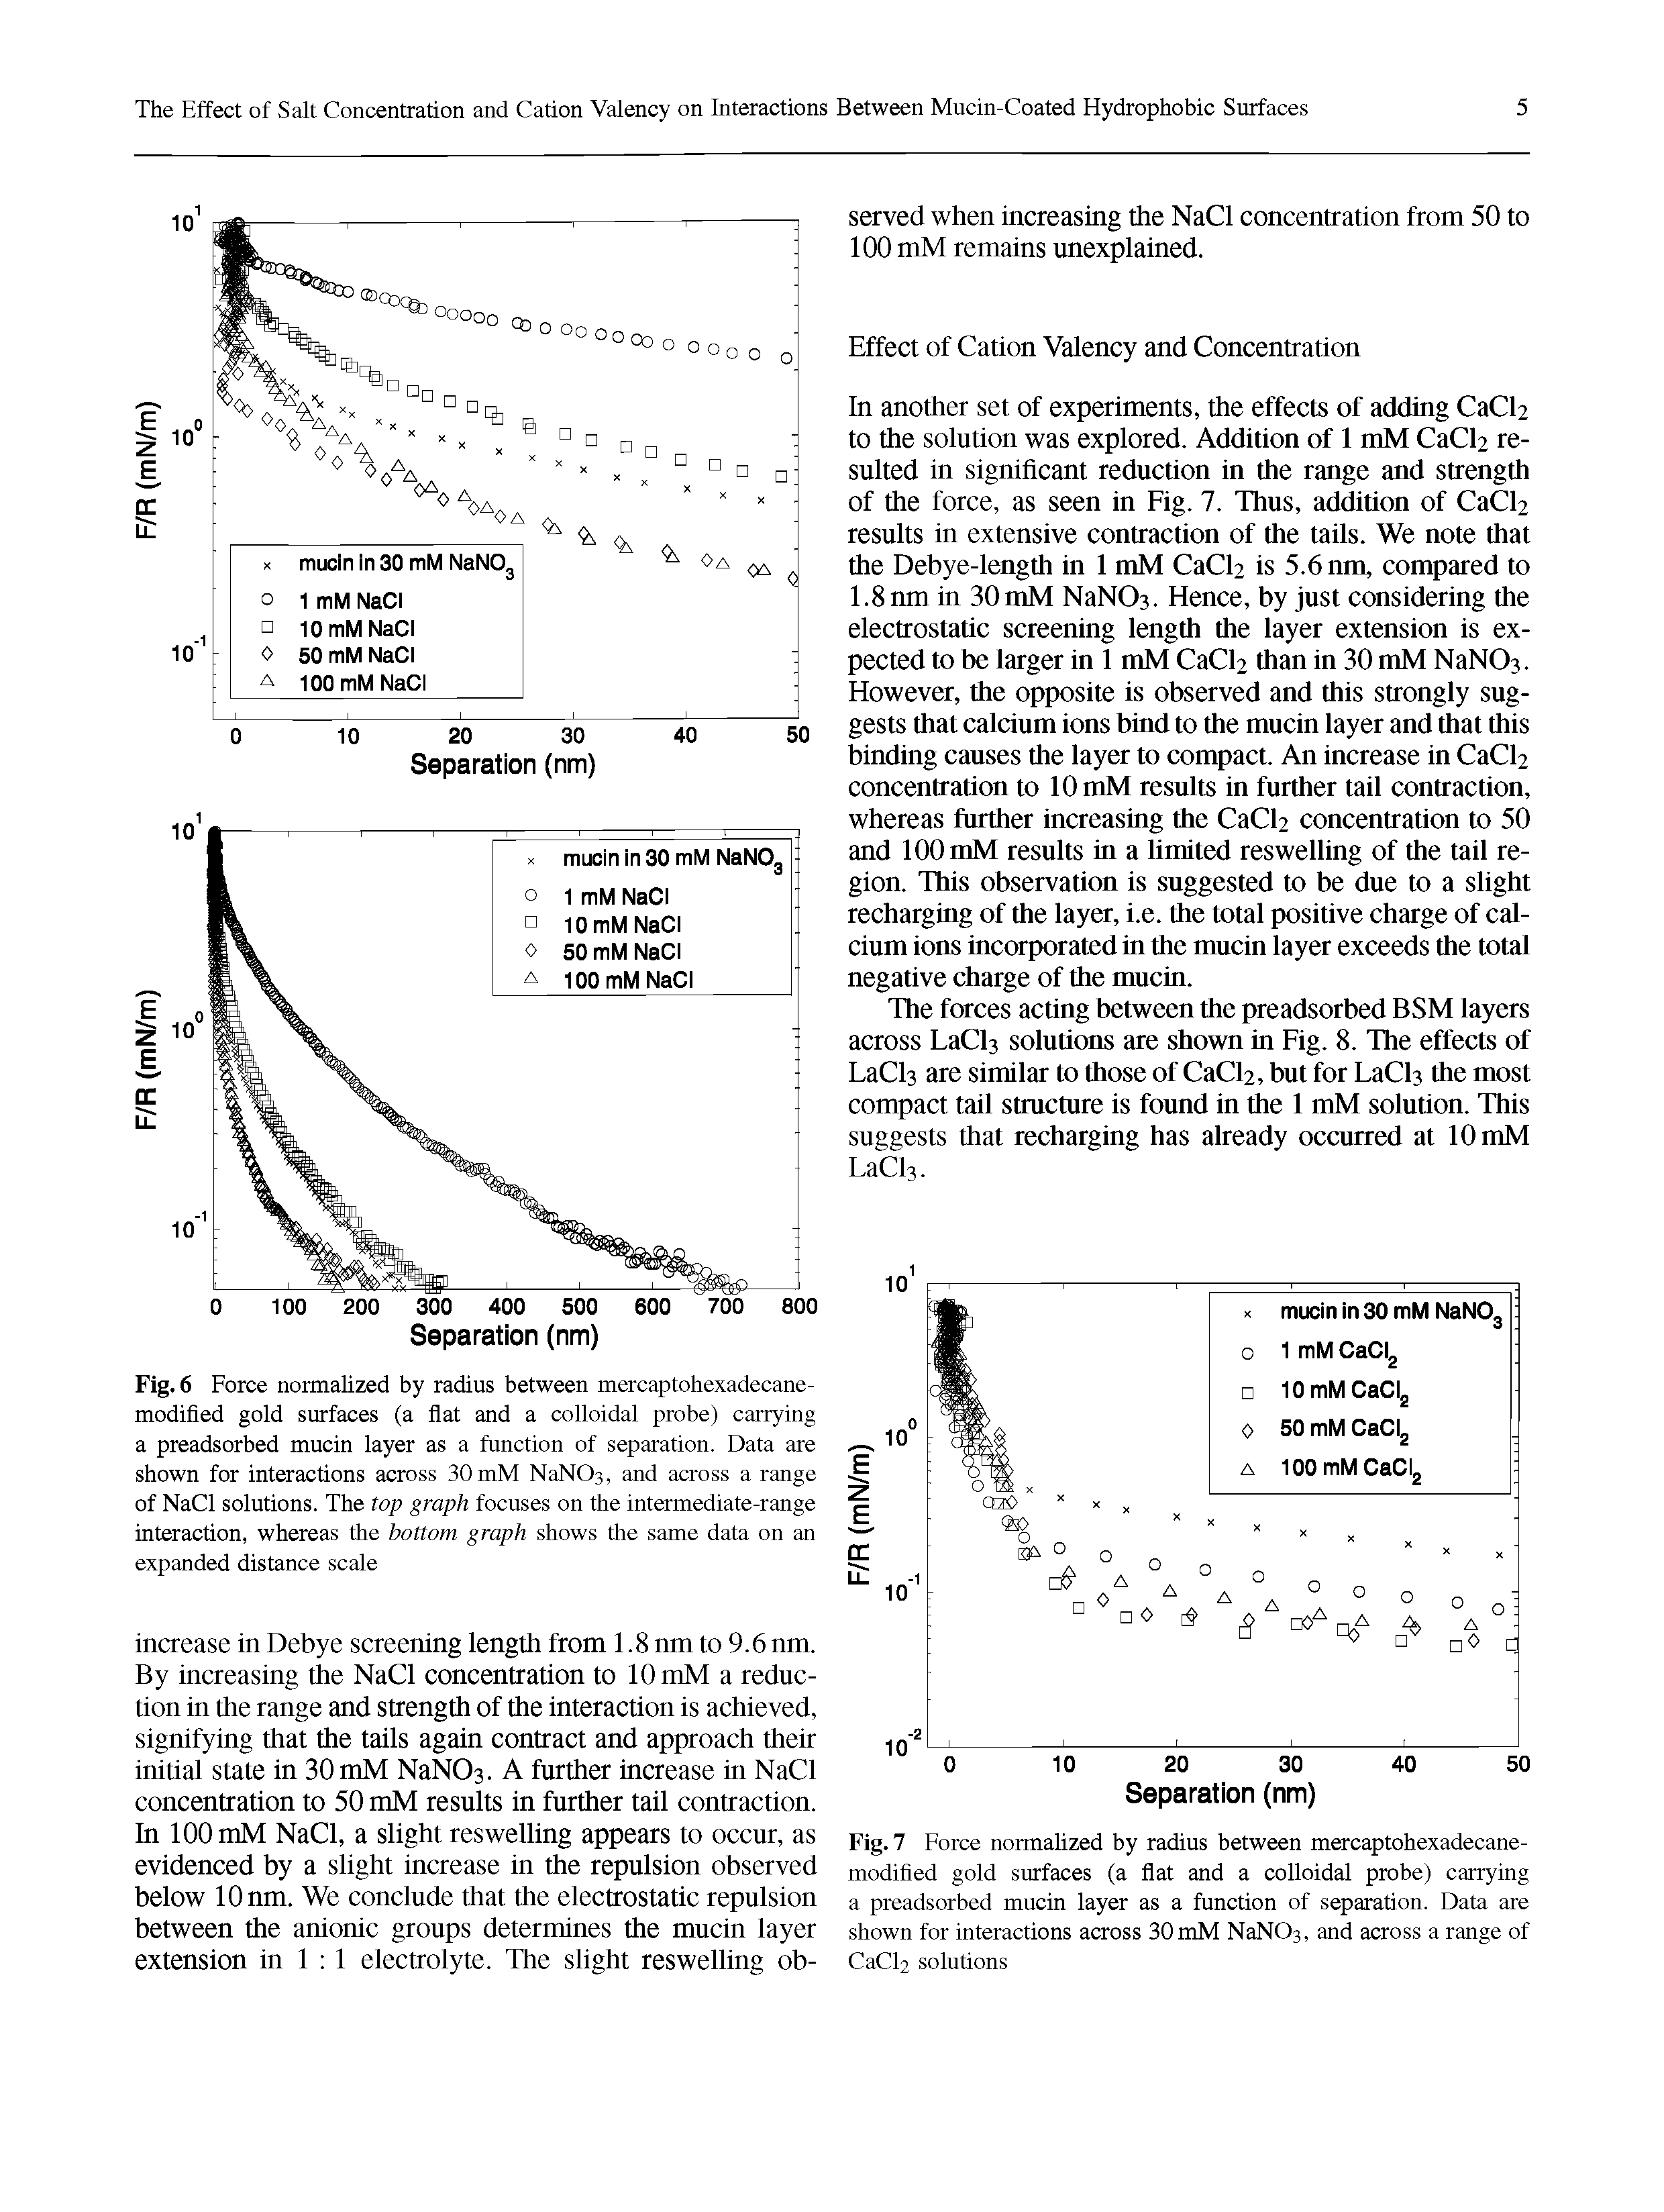 Fig. 6 Force nonnahzed by radius between mercaptobexadecane-modifled gold surfaces (a flat and a colloidal probe) carrying a preadsorbed mucin layer as a function of separation. Data are shown for interactions across 30 mM NaNOy, and across a range of NaCl solutions. The top graph focuses on the intermediate-range interaction, whereas the bottom graph shows the same data on an expanded distance scale...